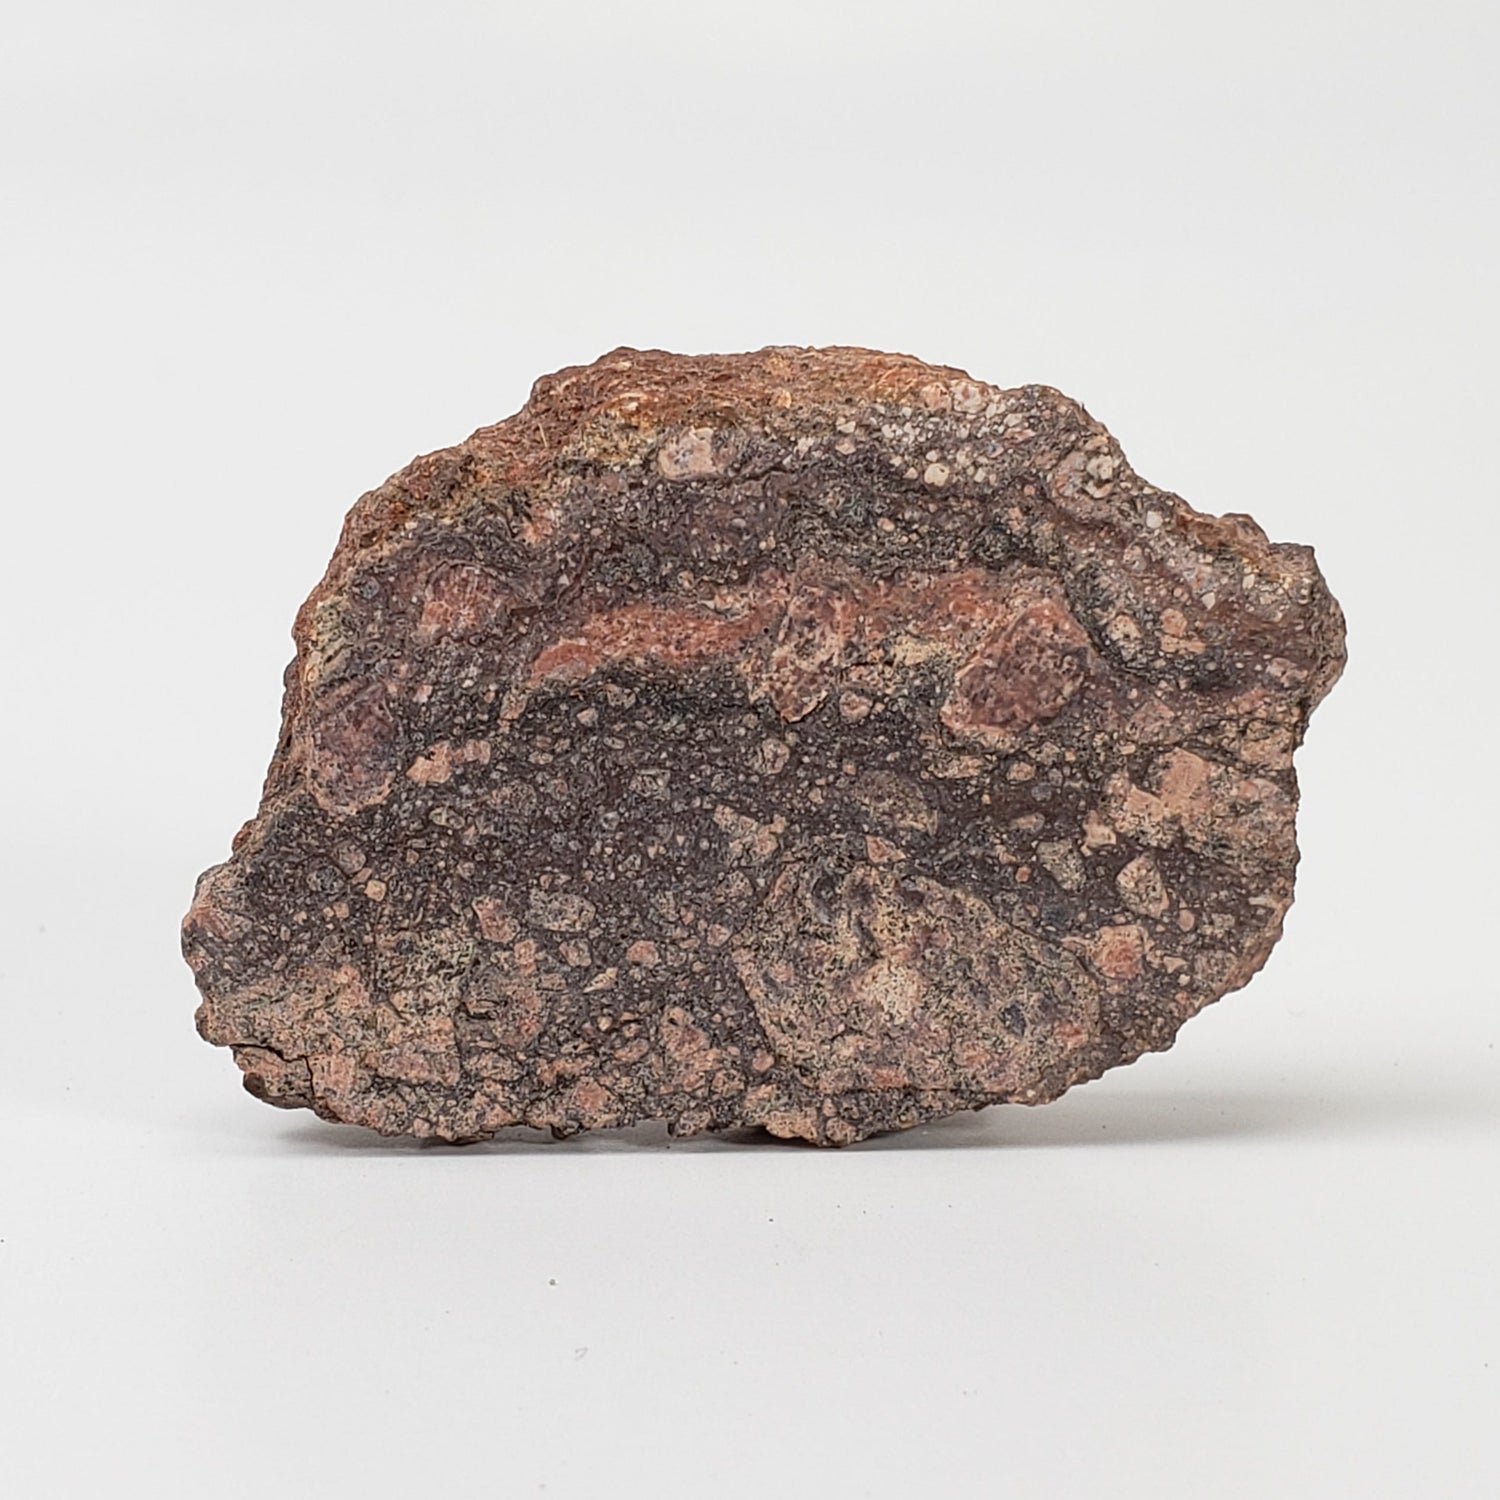 Impact Melt Rock | 11.4 grams | Dhala Impact Structure | 3rd Oldest Impact | India